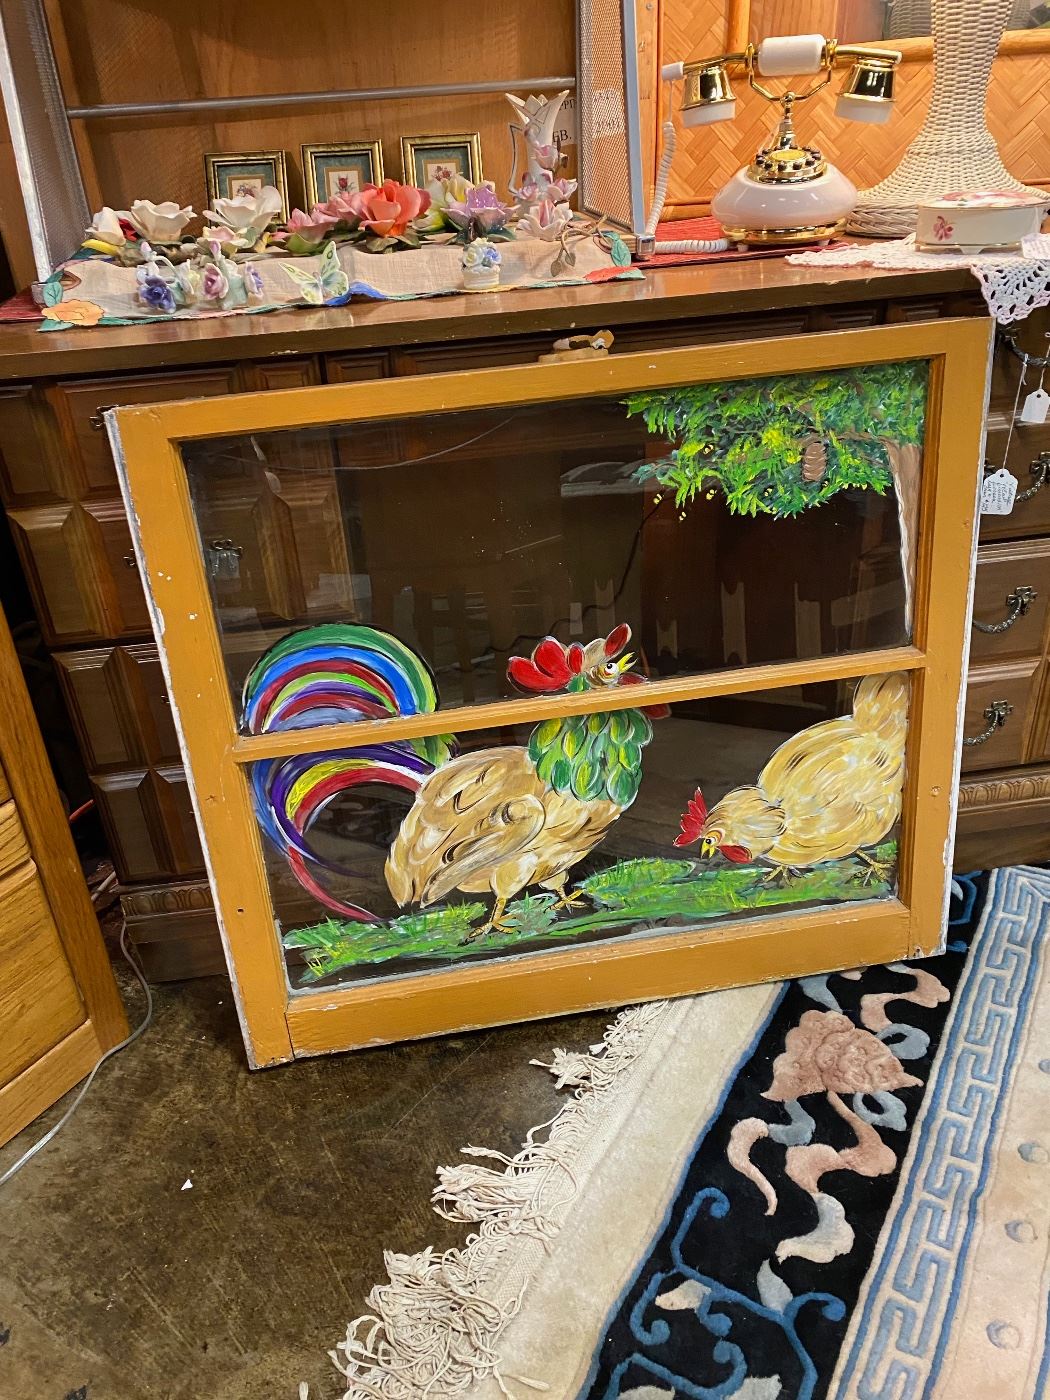 32" x 28 1/2", Hand Painted Rooster and Chicken on an antique wooden window 